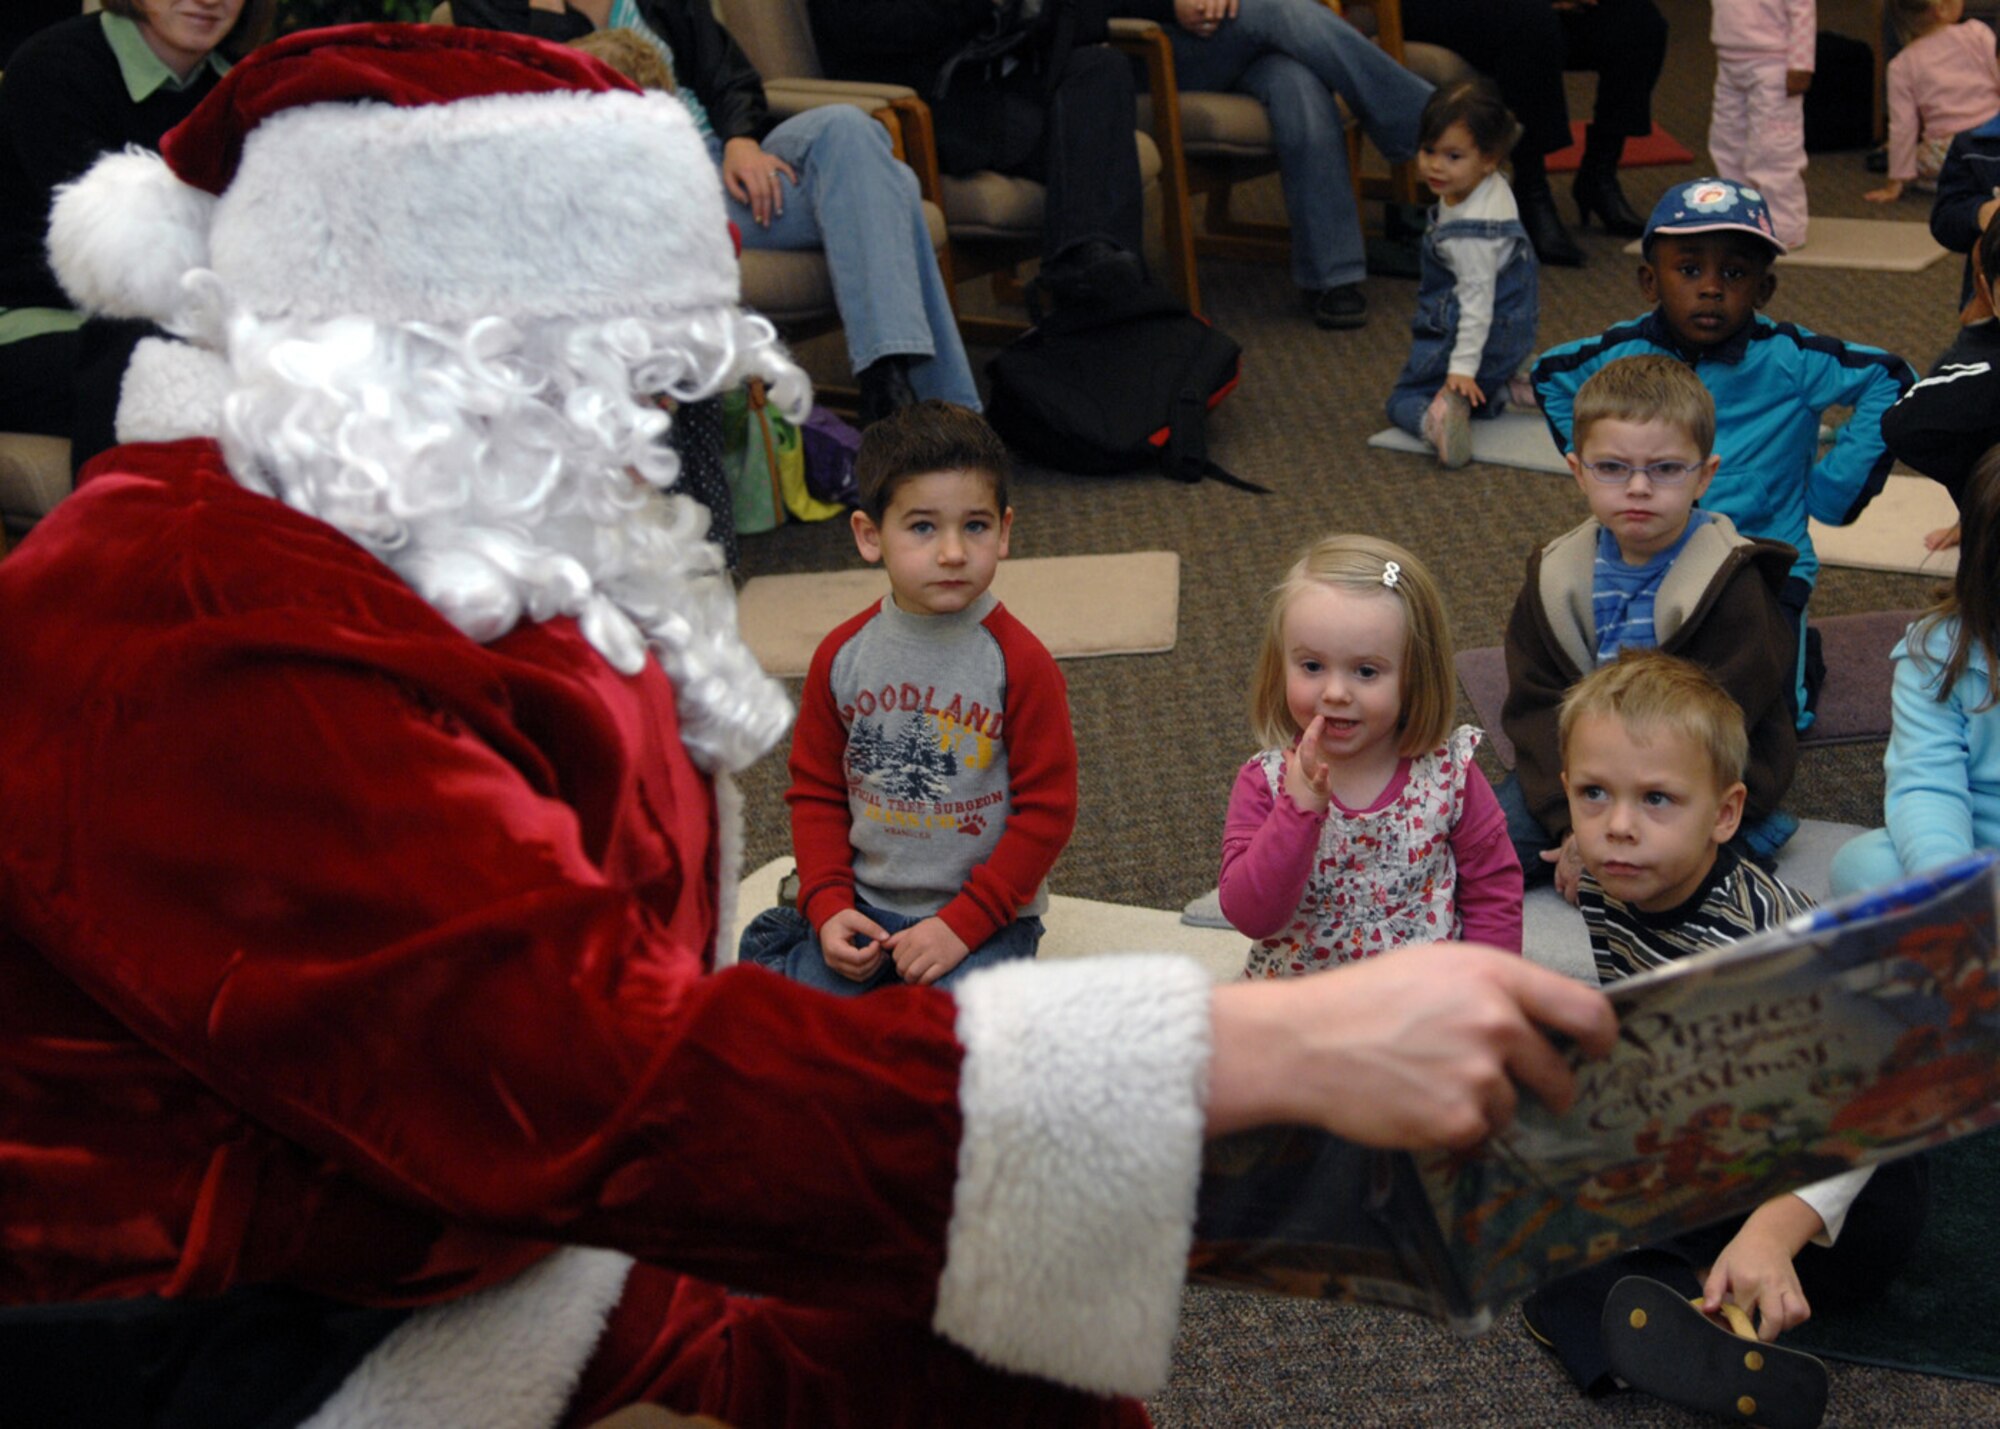 1st Lt. Joseph Dowell, 49th Mission Support Group, plays Santa for his story time reading of “The Pirate's Night Before Christmas” at Ahren's Memorial library at Holloman Air Force Base, N.M., Dec. 17. Children of Holloman sat around Santa as they listened closely to the story. (U.S. Air Force photo/Airman 1st Class Veronica Salgado)